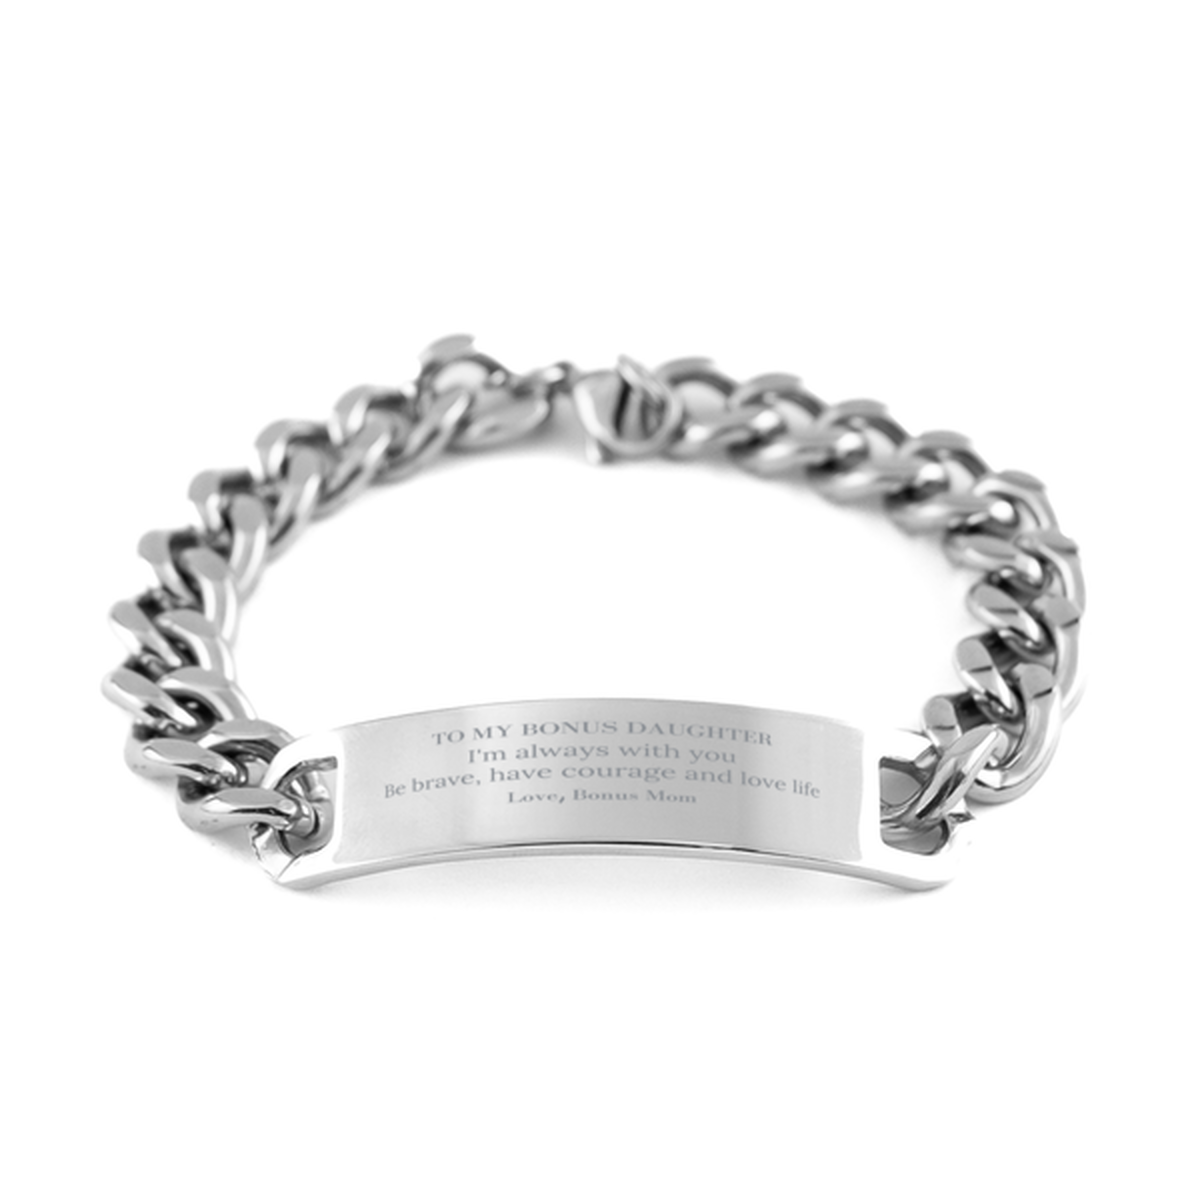 To My Bonus Daughter Gifts from Bonus Mom, Unique Cuban Chain Stainless Steel Bracelet Inspirational Christmas Birthday Graduation Gifts for Bonus Daughter I'm always with you. Be brave, have courage and love life. Love, Bonus Mom